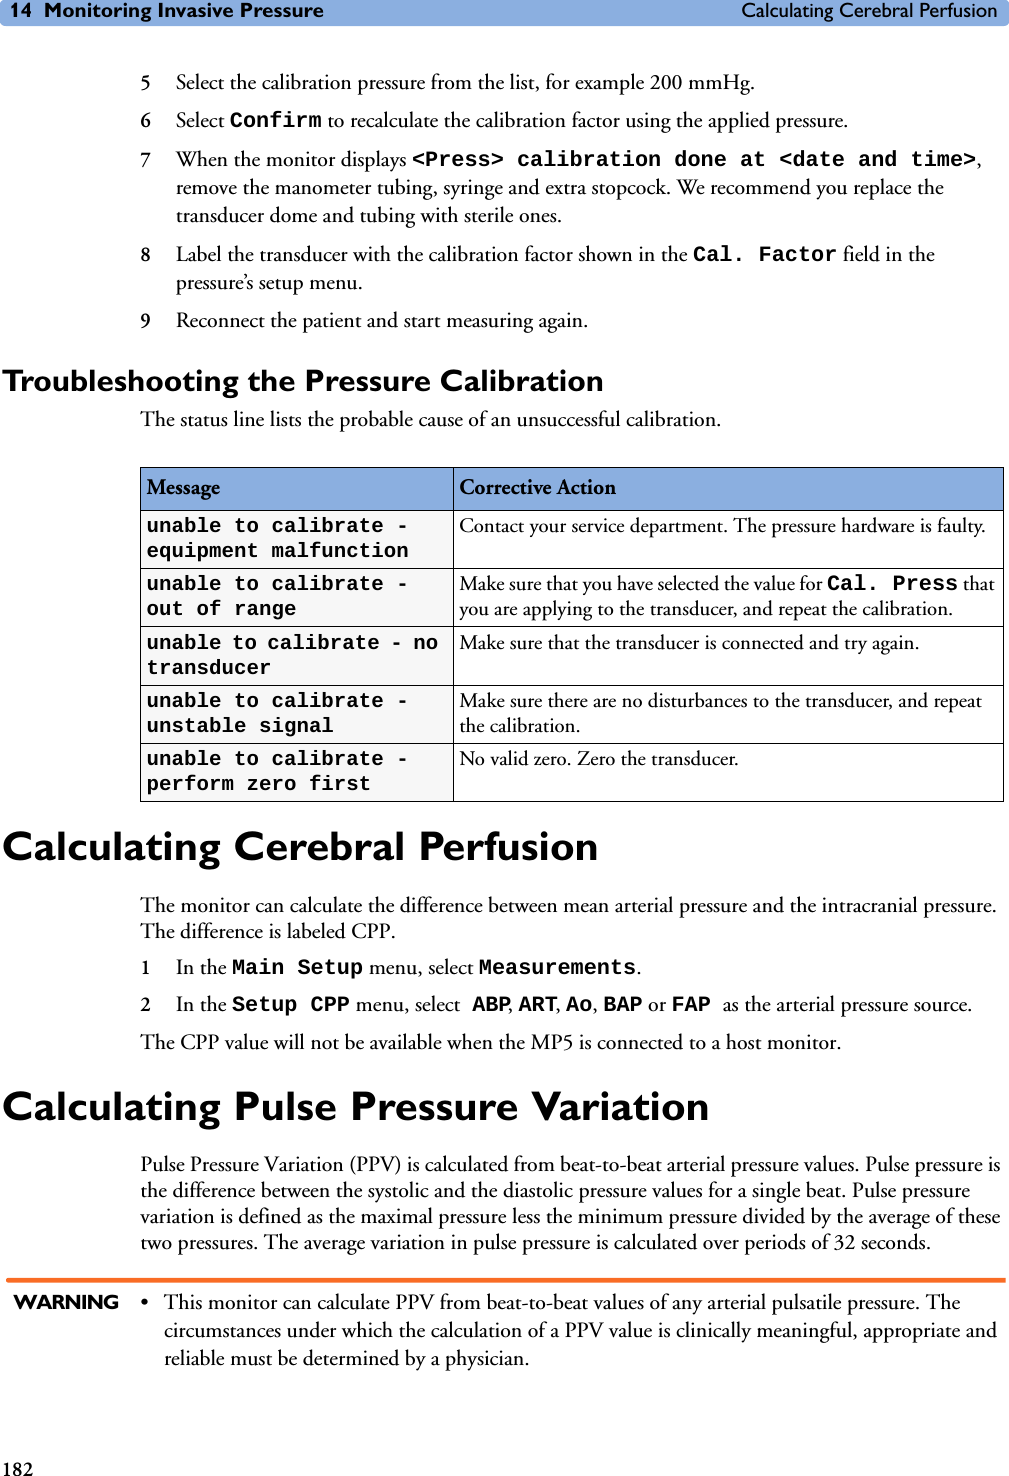 14 Monitoring Invasive Pressure Calculating Cerebral Perfusion1825Select the calibration pressure from the list, for example 200 mmHg.6Select Confirm to recalculate the calibration factor using the applied pressure. 7When the monitor displays &lt;Press&gt; calibration done at &lt;date and time&gt;, remove the manometer tubing, syringe and extra stopcock. We recommend you replace the transducer dome and tubing with sterile ones.8Label the transducer with the calibration factor shown in the Cal. Factor field in the pressure’s setup menu.9Reconnect the patient and start measuring again.Troubleshooting the Pressure CalibrationThe status line lists the probable cause of an unsuccessful calibration.Calculating Cerebral PerfusionThe monitor can calculate the difference between mean arterial pressure and the intracranial pressure. The difference is labeled CPP.1In the Main Setup menu, select Measurements.2In the Setup CPP menu, select ABP, ART, Ao, BAP or FAP as the arterial pressure source.The CPP value will not be available when the MP5 is connected to a host monitor.Calculating Pulse Pressure VariationPulse Pressure Variation (PPV) is calculated from beat-to-beat arterial pressure values. Pulse pressure is the difference between the systolic and the diastolic pressure values for a single beat. Pulse pressure variation is defined as the maximal pressure less the minimum pressure divided by the average of these two pressures. The average variation in pulse pressure is calculated over periods of 32 seconds.WARNING • This monitor can calculate PPV from beat-to-beat values of any arterial pulsatile pressure. The circumstances under which the calculation of a PPV value is clinically meaningful, appropriate and reliable must be determined by a physician. Message Corrective Actionunable to calibrate - equipment malfunctionContact your service department. The pressure hardware is faulty.unable to calibrate - out of rangeMake sure that you have selected the value for Cal. Press that you are applying to the transducer, and repeat the calibration.unable to calibrate - no transducerMake sure that the transducer is connected and try again.unable to calibrate - unstable signalMake sure there are no disturbances to the transducer, and repeat the calibration.unable to calibrate - perform zero firstNo valid zero. Zero the transducer.